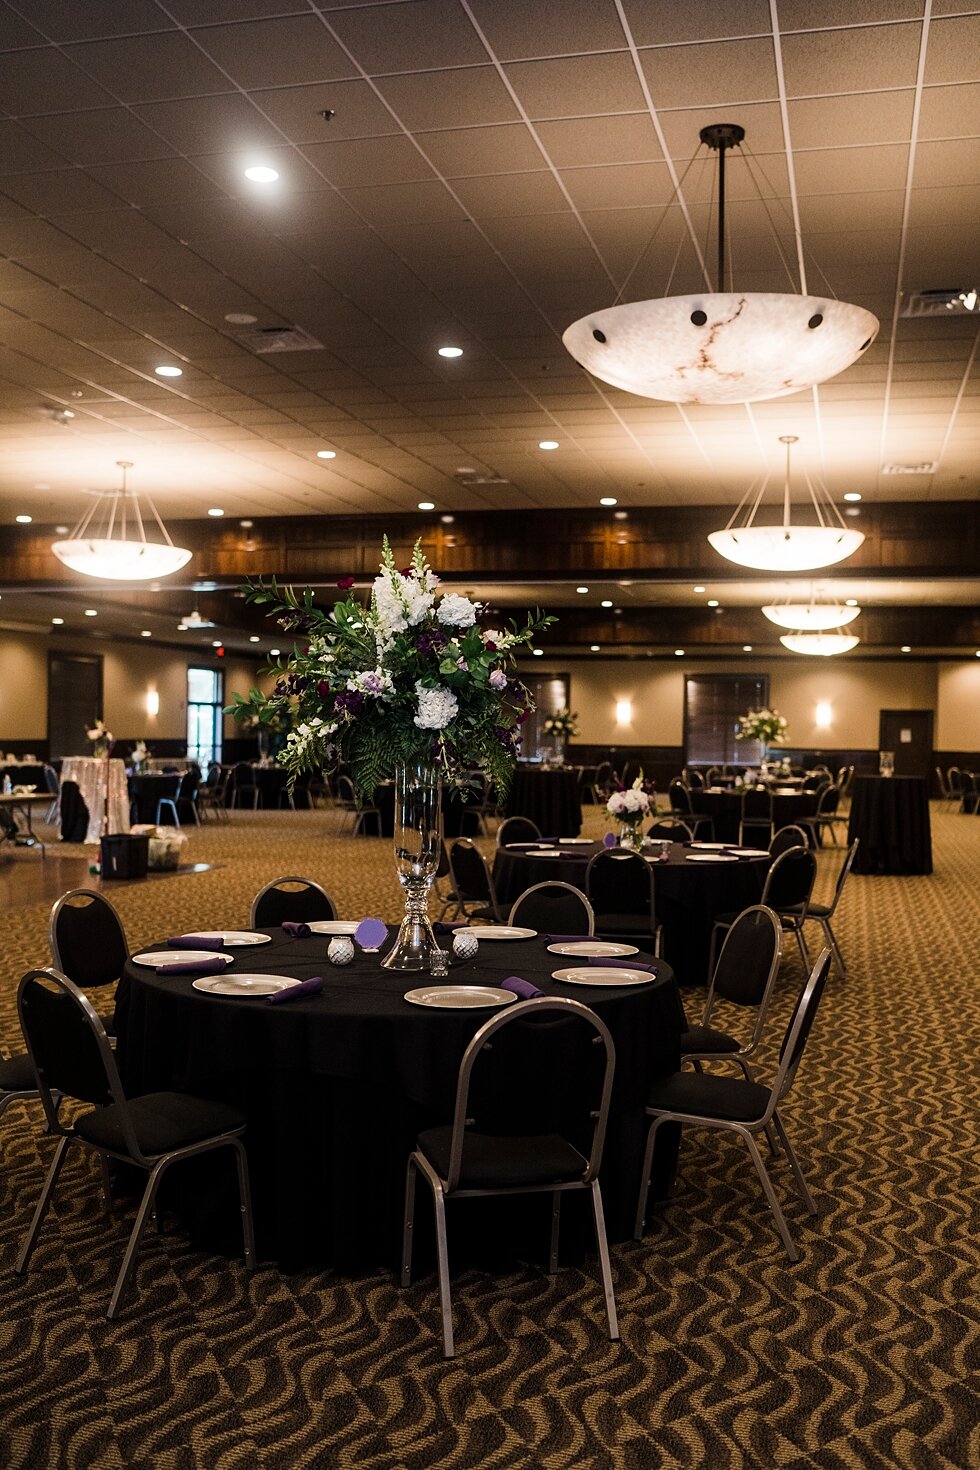  Reception venue prepared for the wedding party and guests to share dinner together and celebrate the bride and groom. wedding ceremony details stunning photography married midwest louisville kentucky #weddingphoto #love #justmarried #midwestphotogra